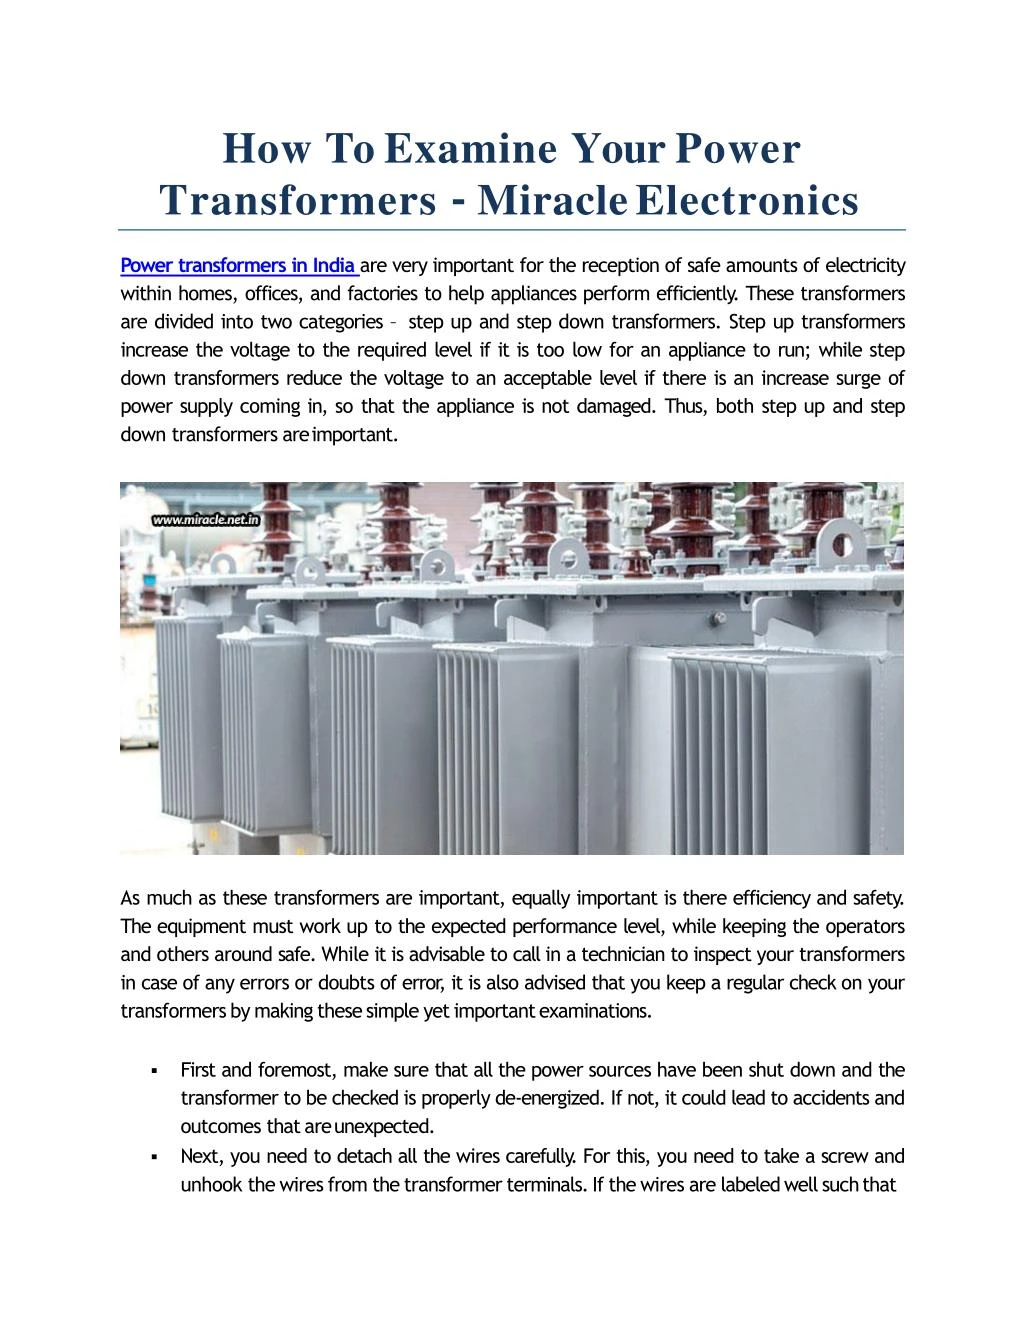 how to examine your power transformers miracle electronics